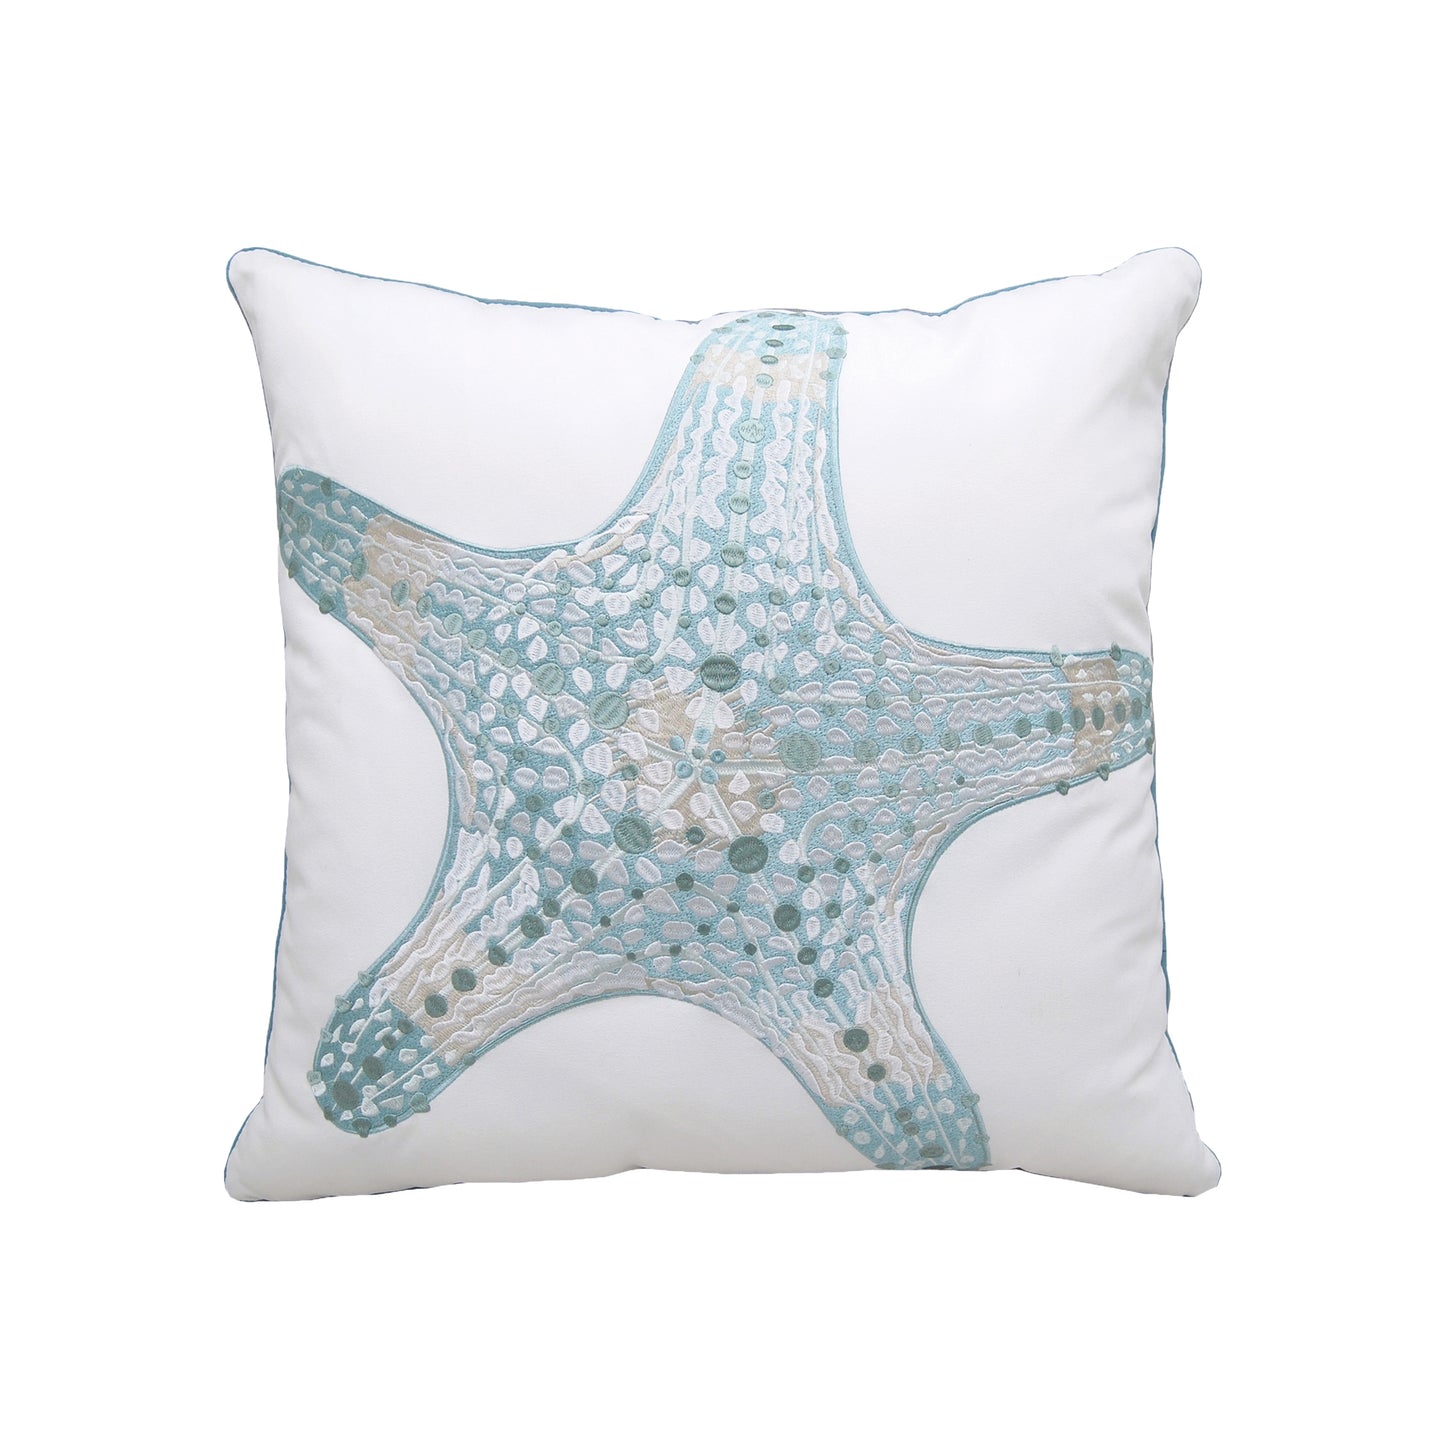 Large sea glass sea star embroidered on a white pillow.